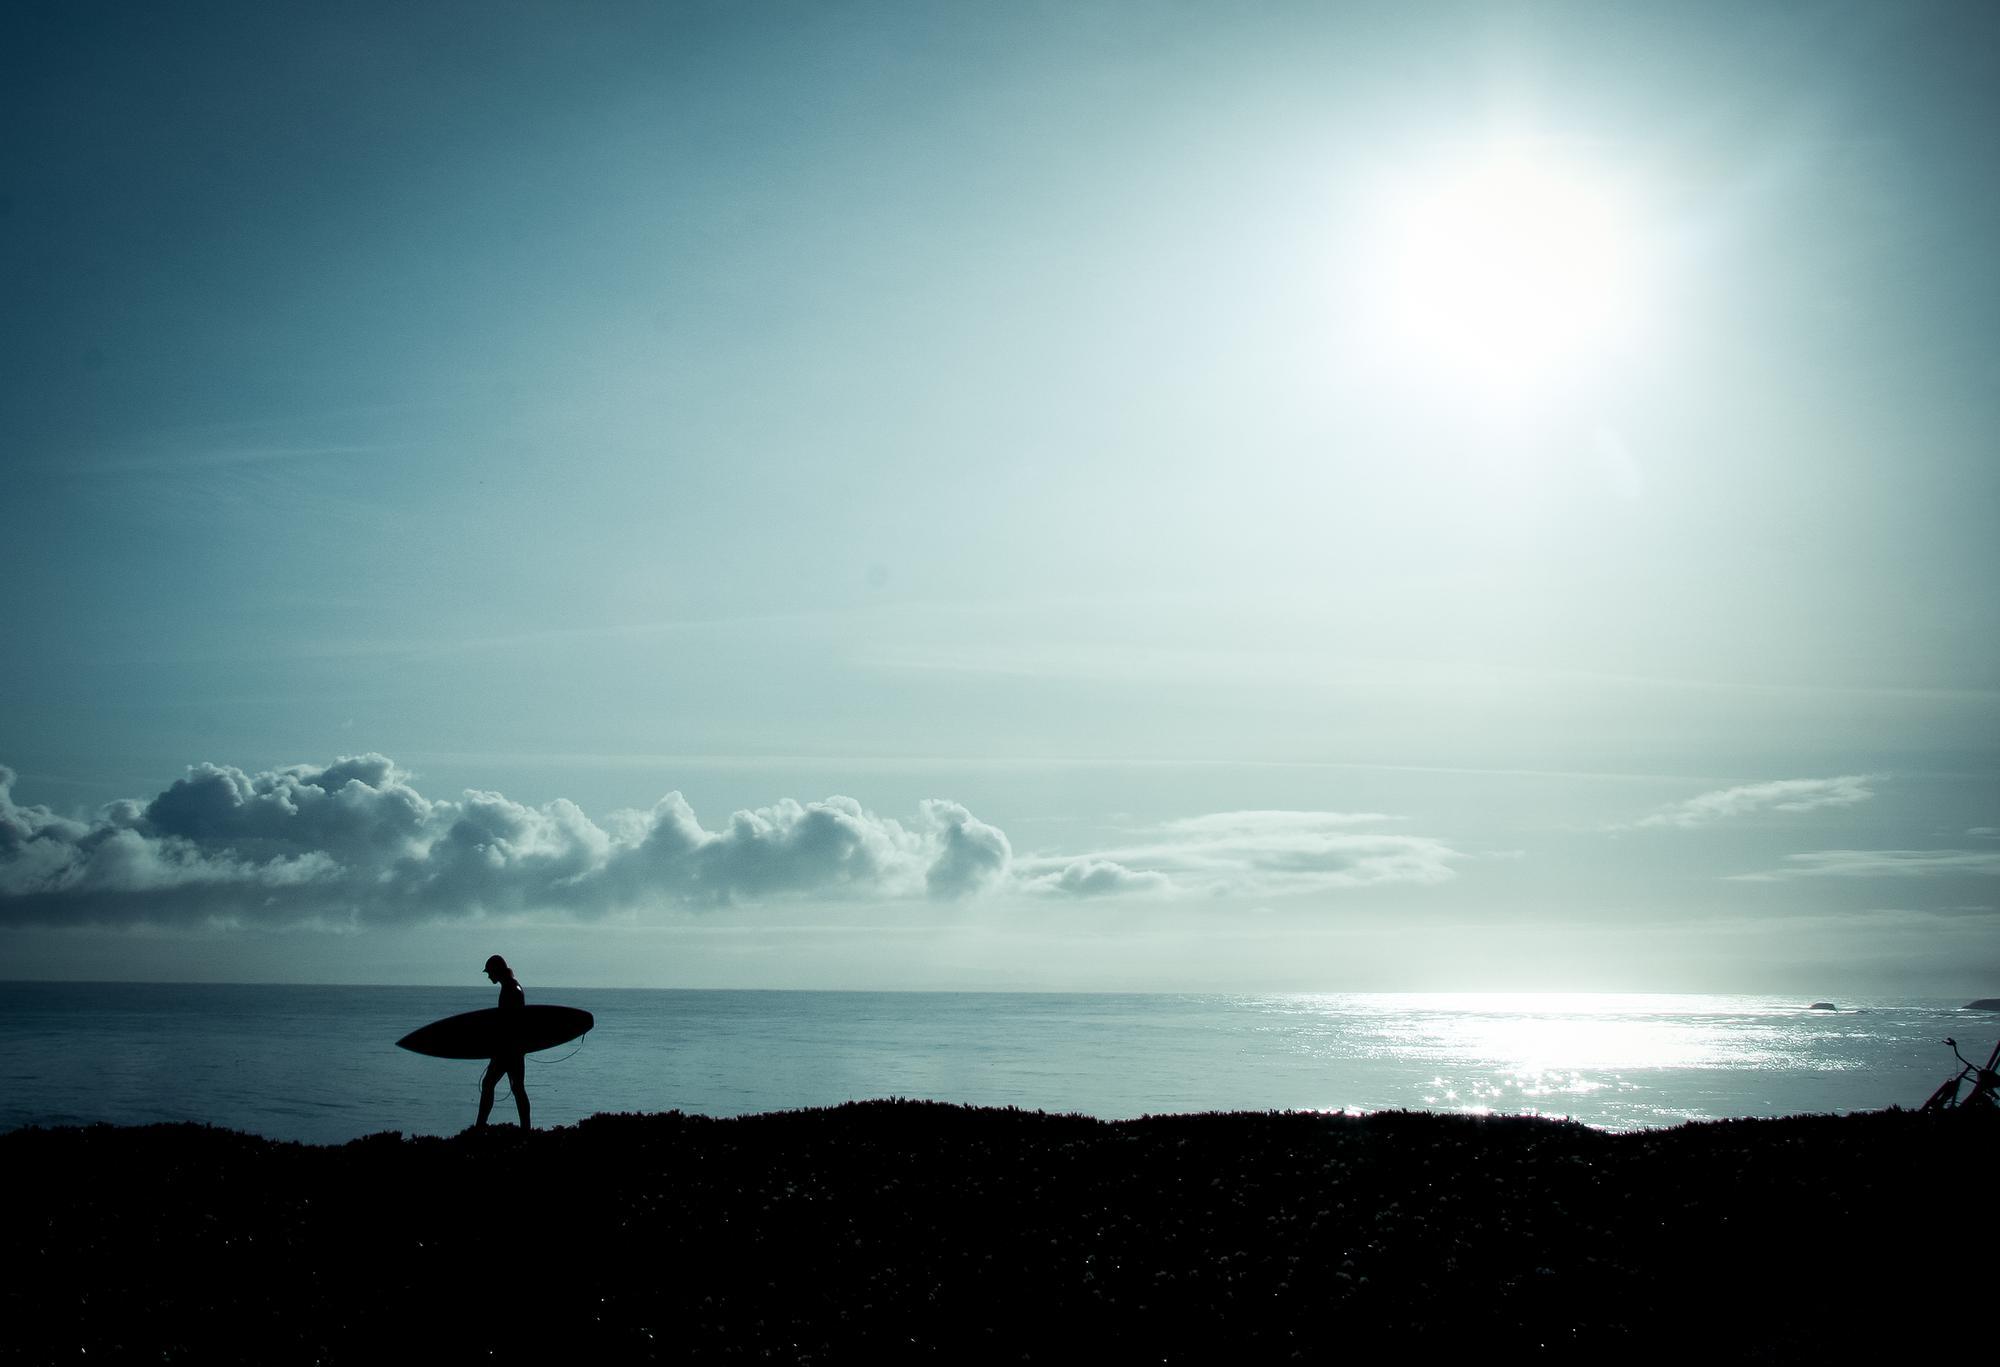 Silhouette of person walking by the ocean with a surf board